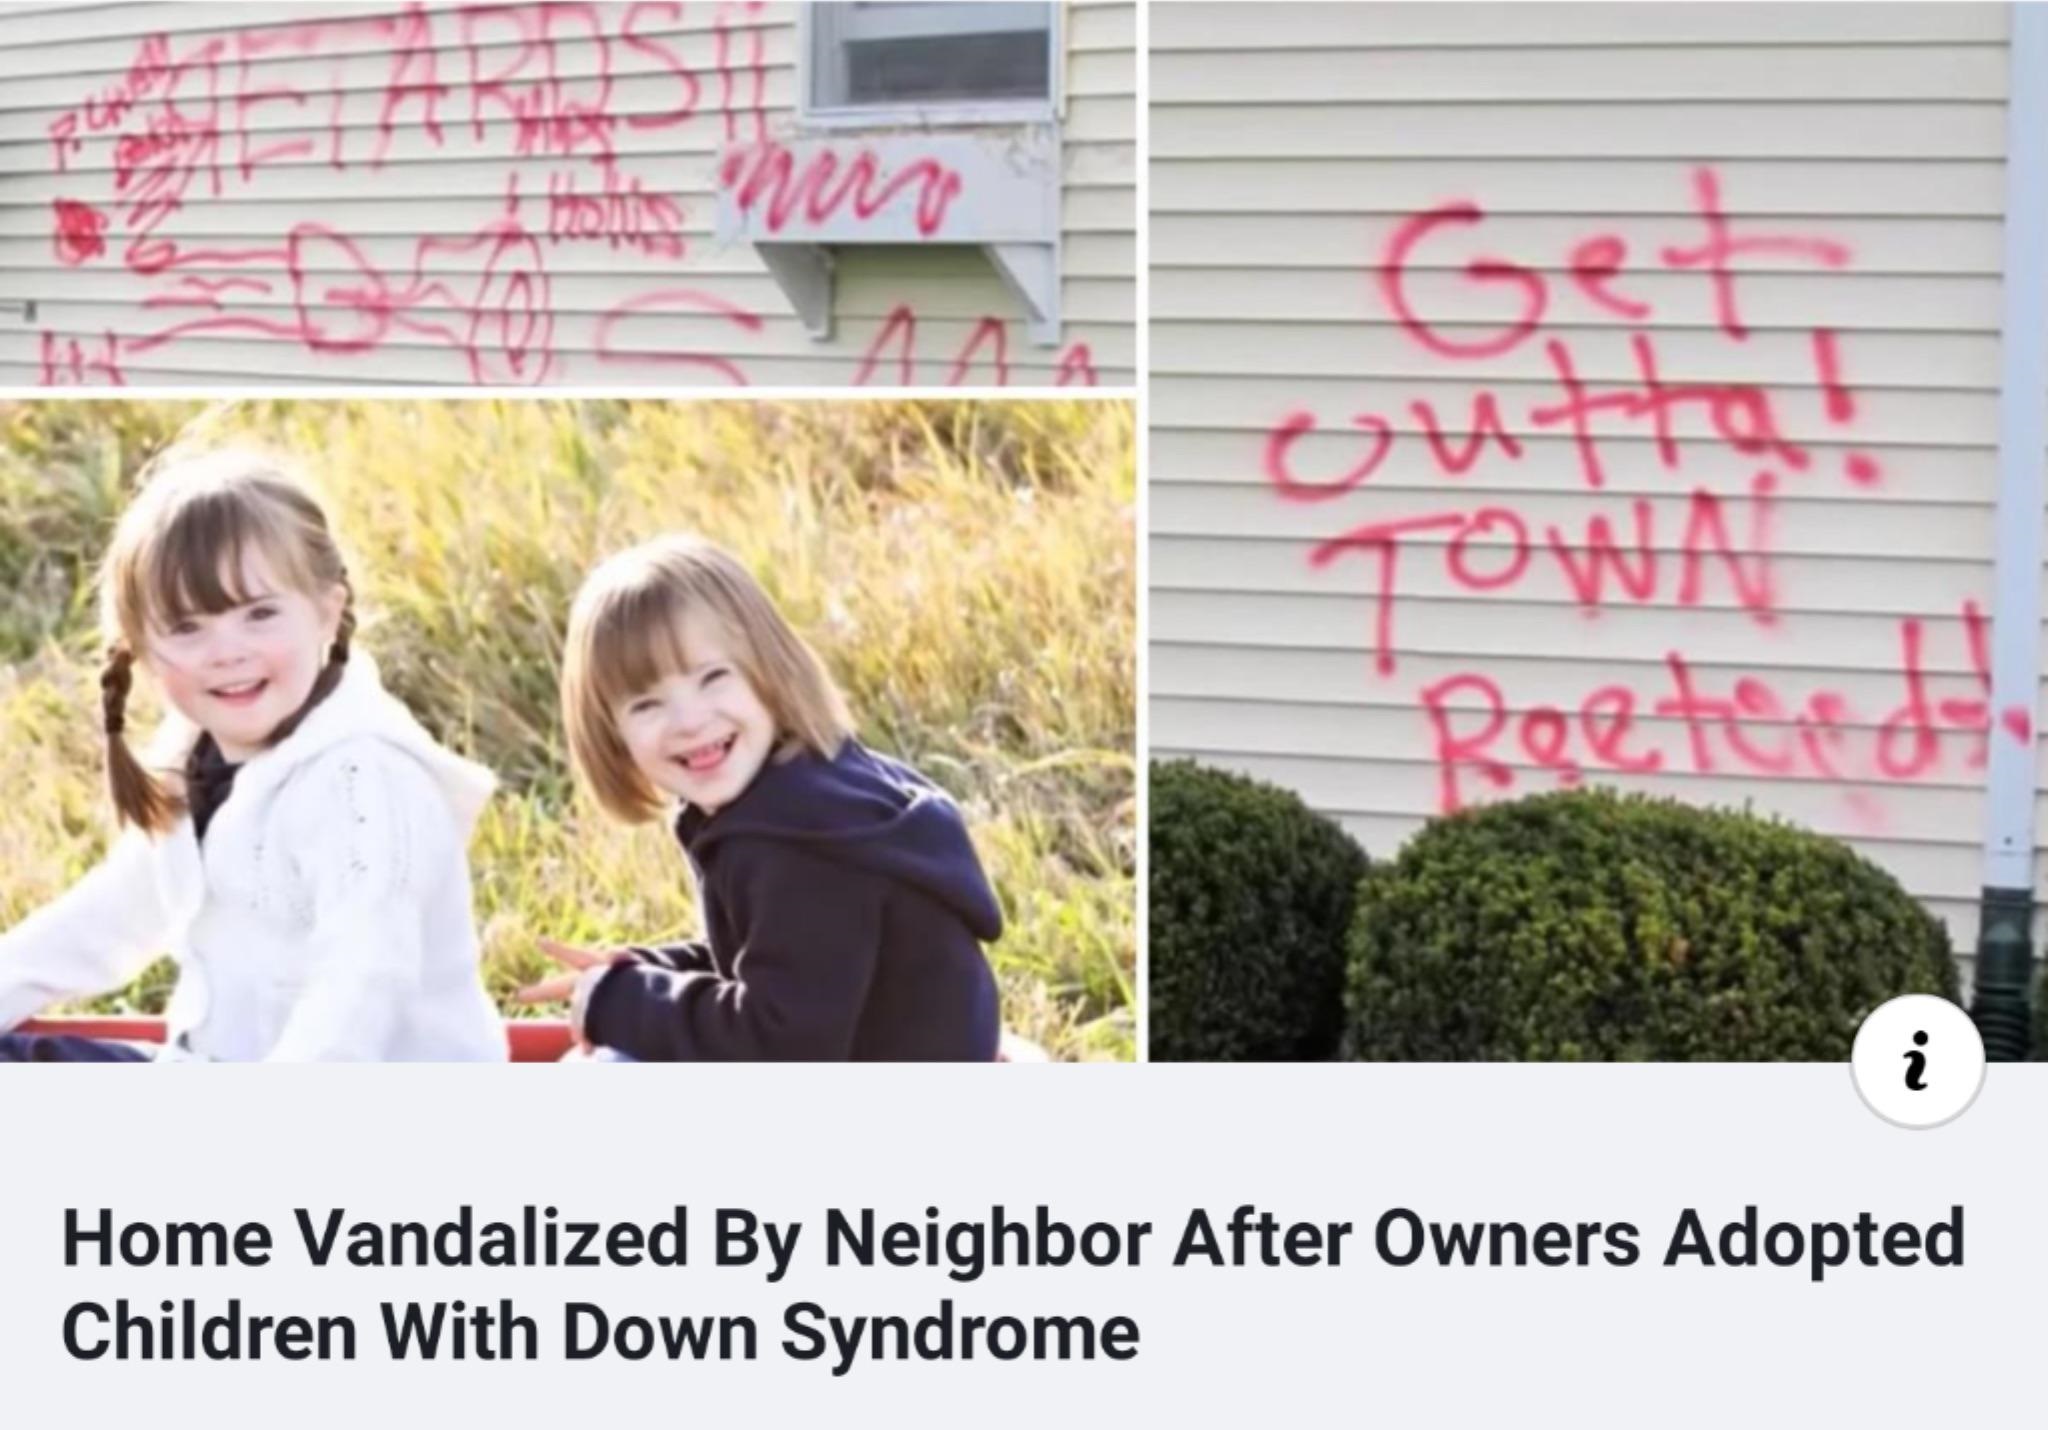 community - rown Reeterd Home Vandalized By Neighbor After Owners Adopted Children With Down Syndrome